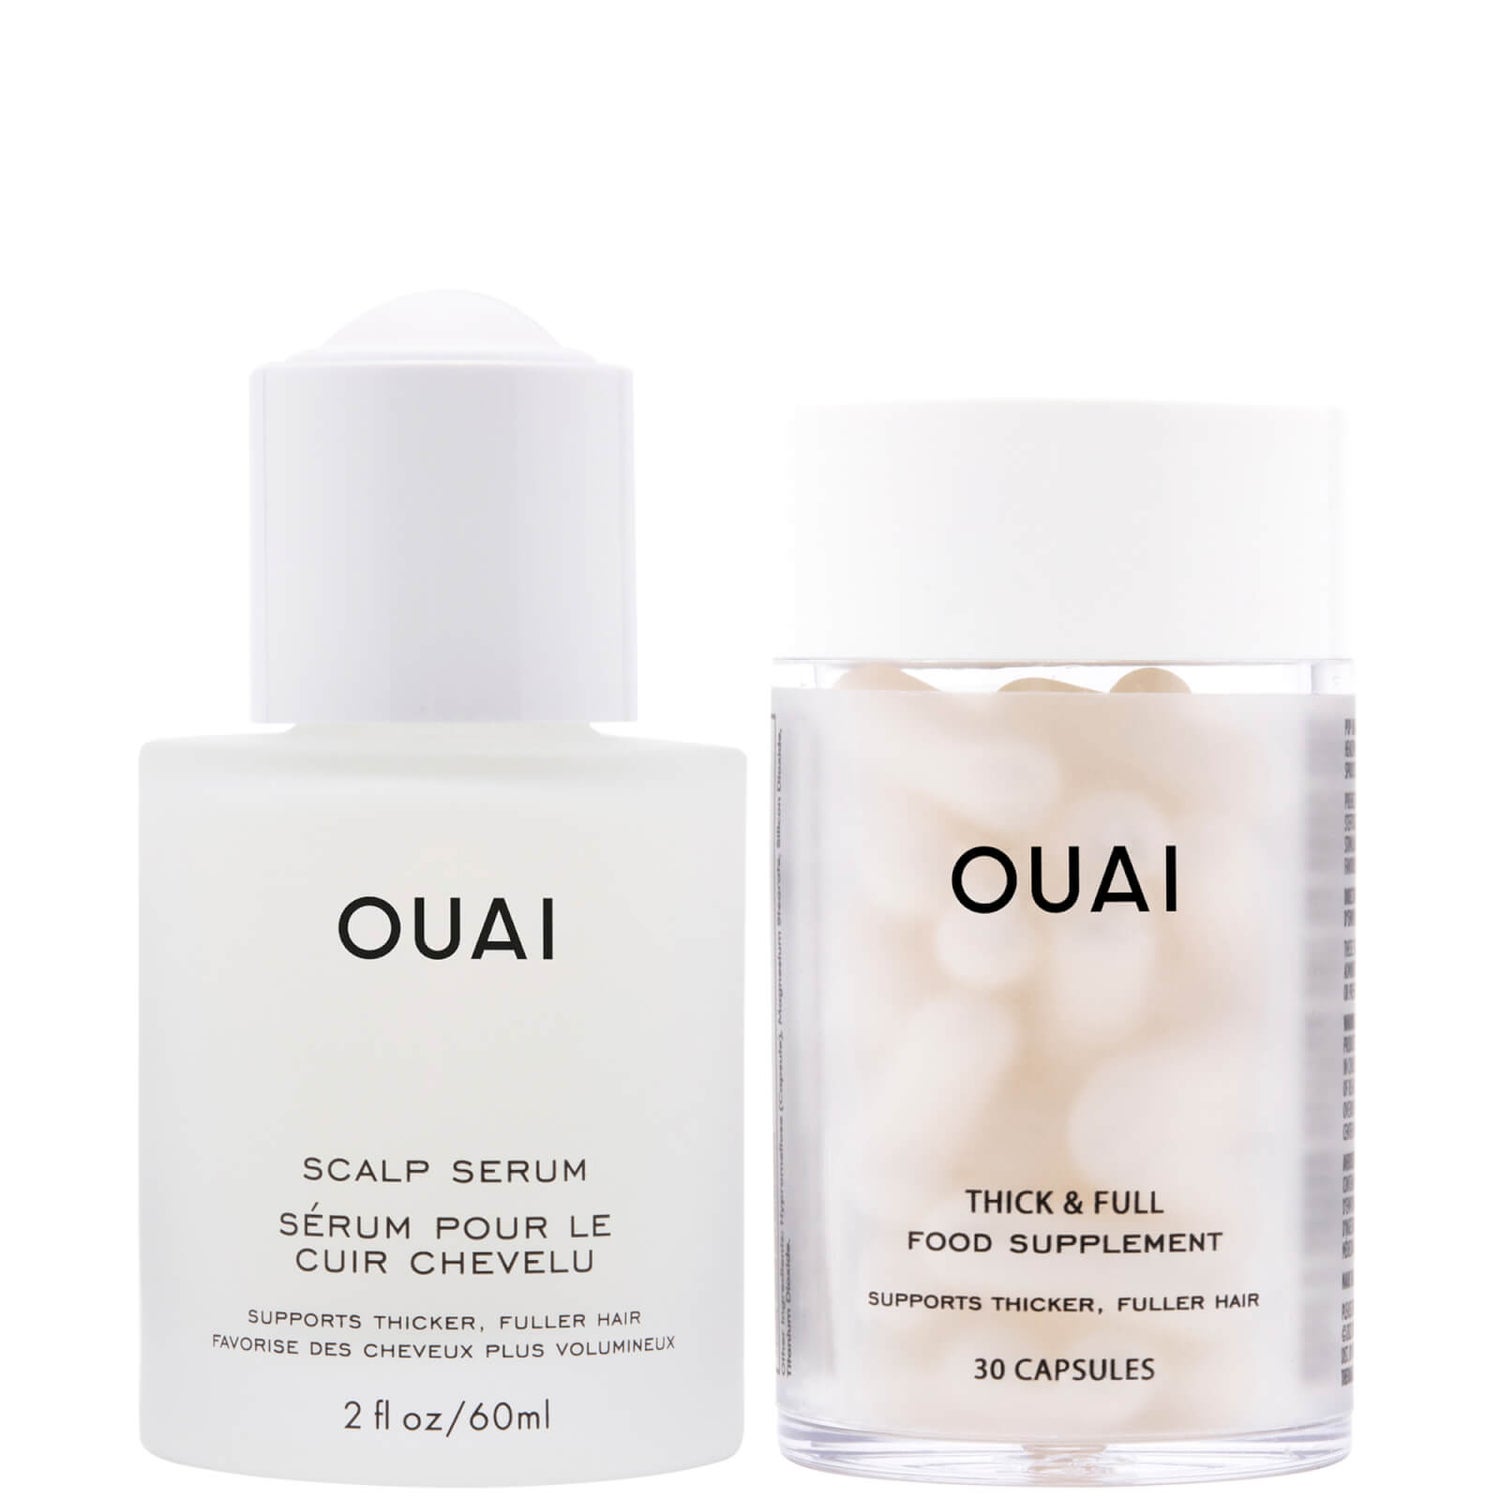 OUAI to Grow Serum and Supplement Bundle (Worth £82.00)